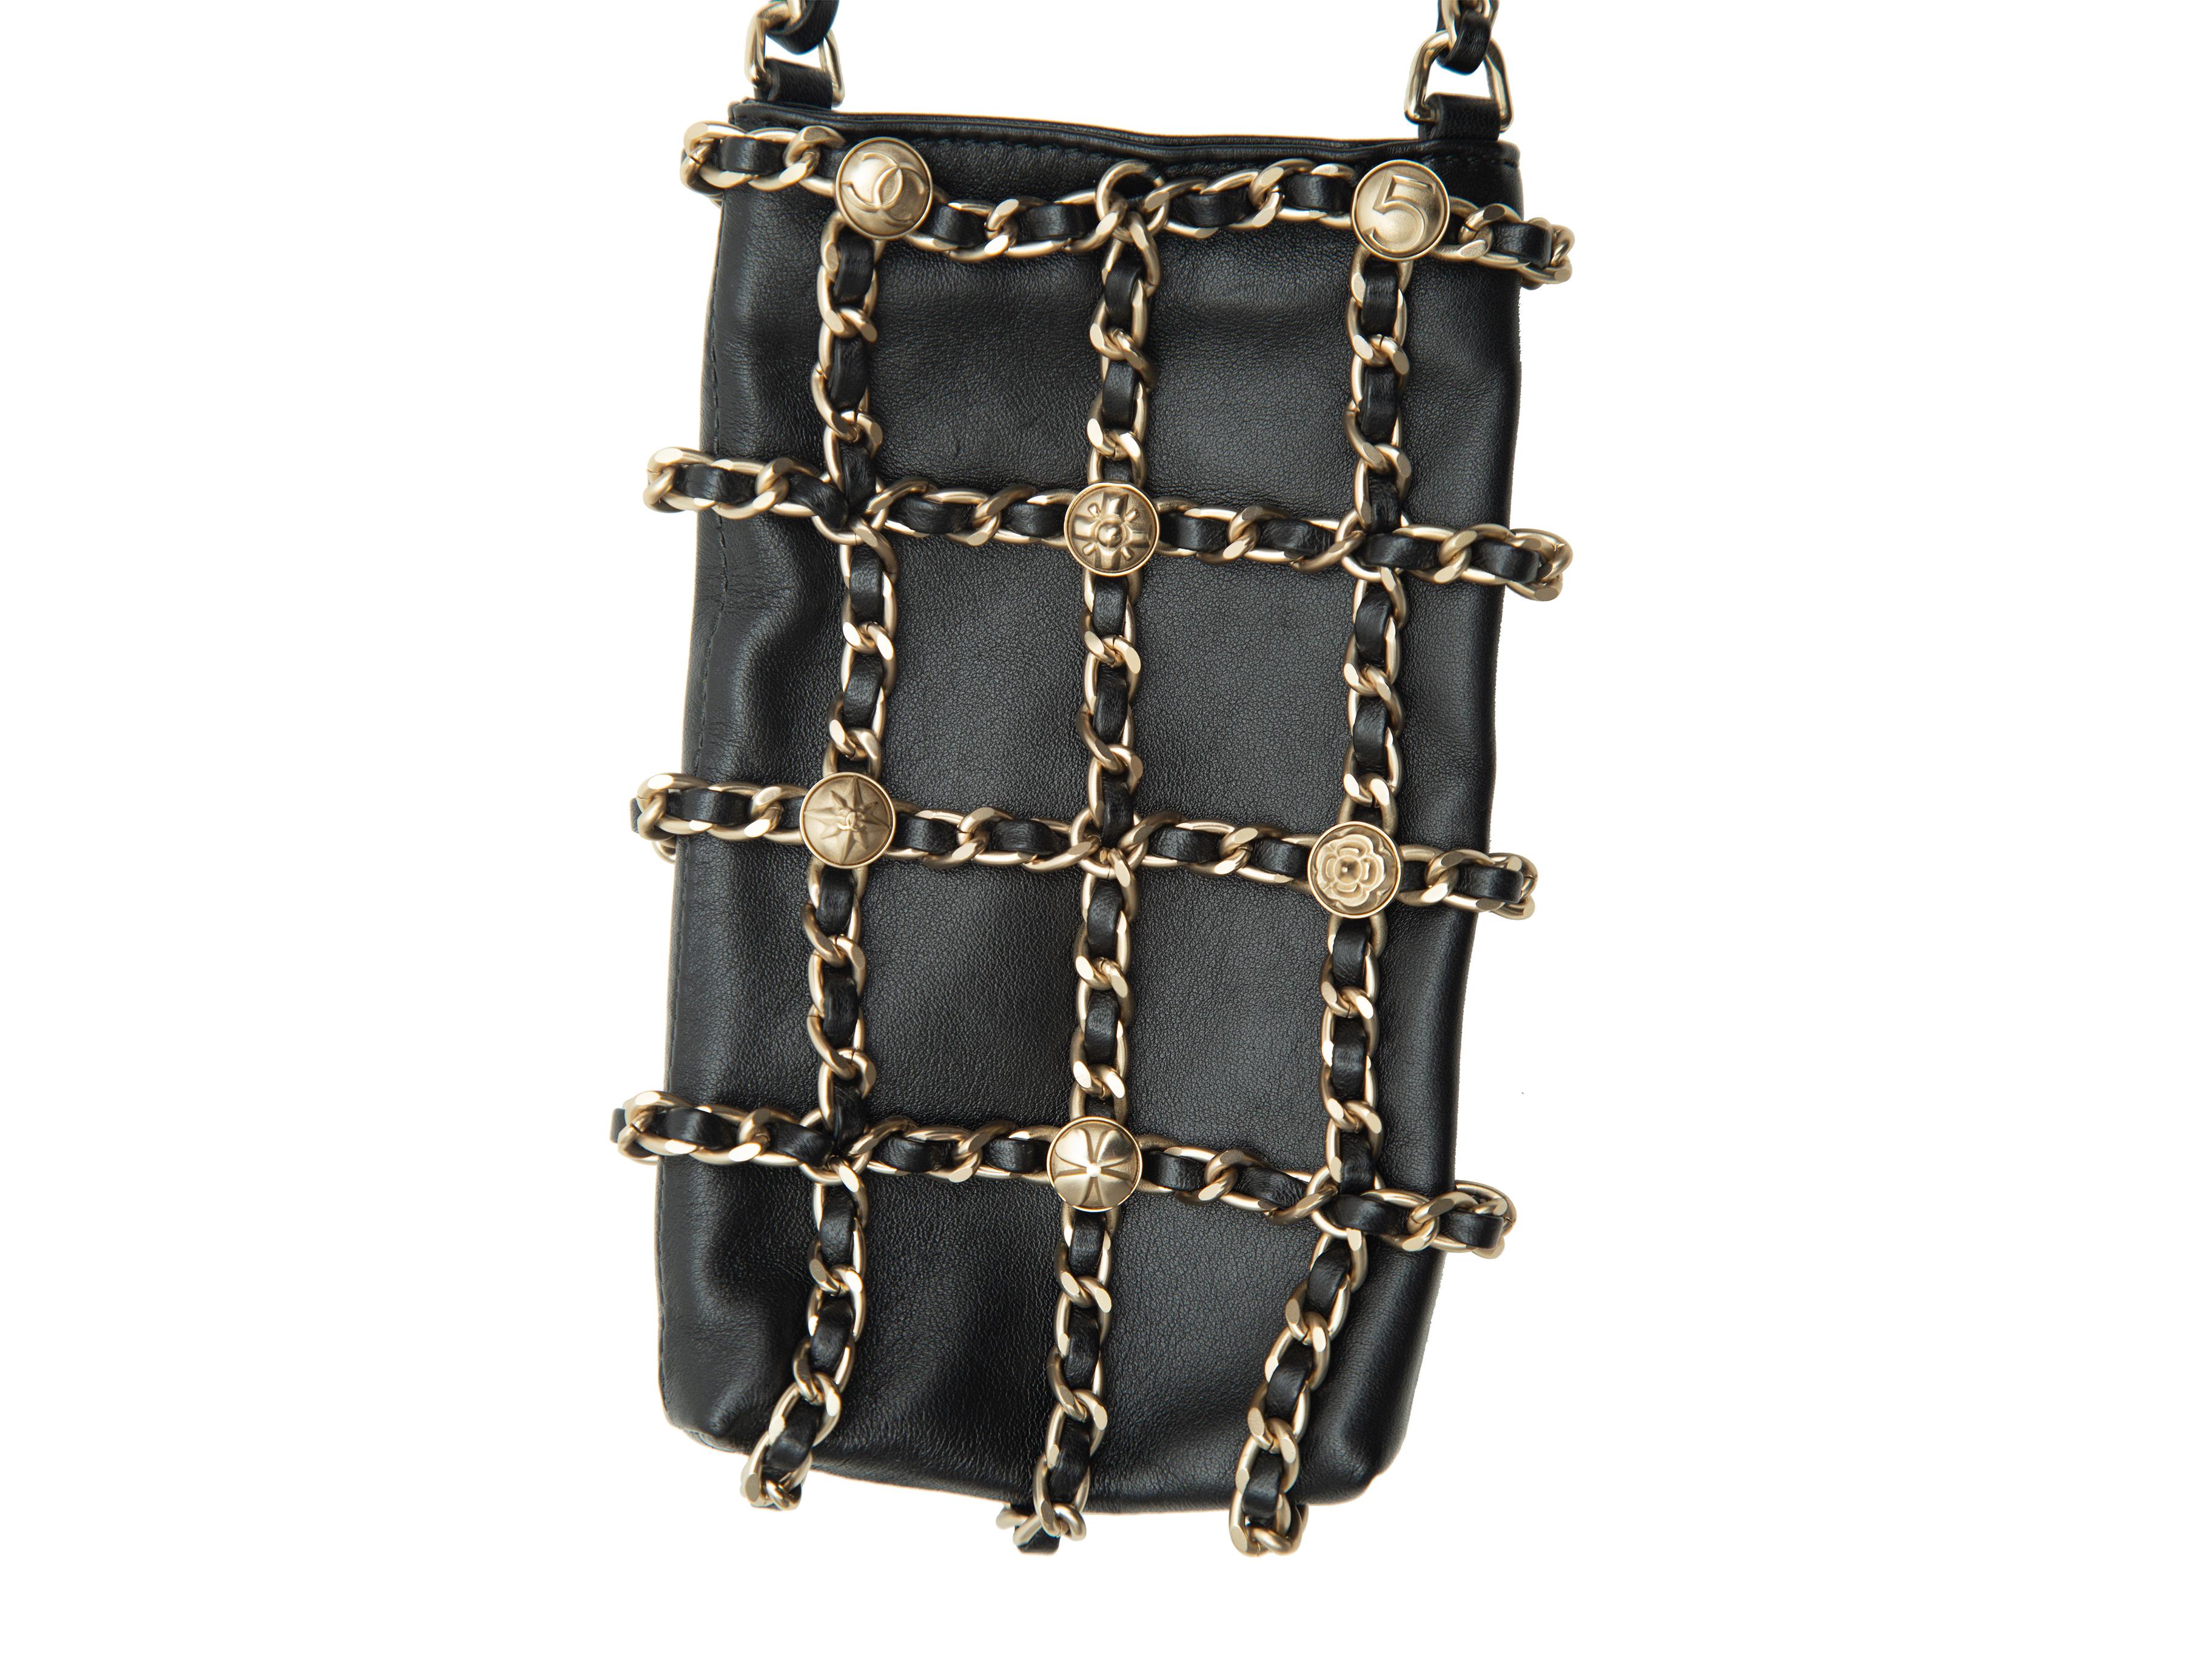 Product details: Black leather and chain-link crossbody phone bag by Chanel. Gold-tone hardware. Single strap. 4